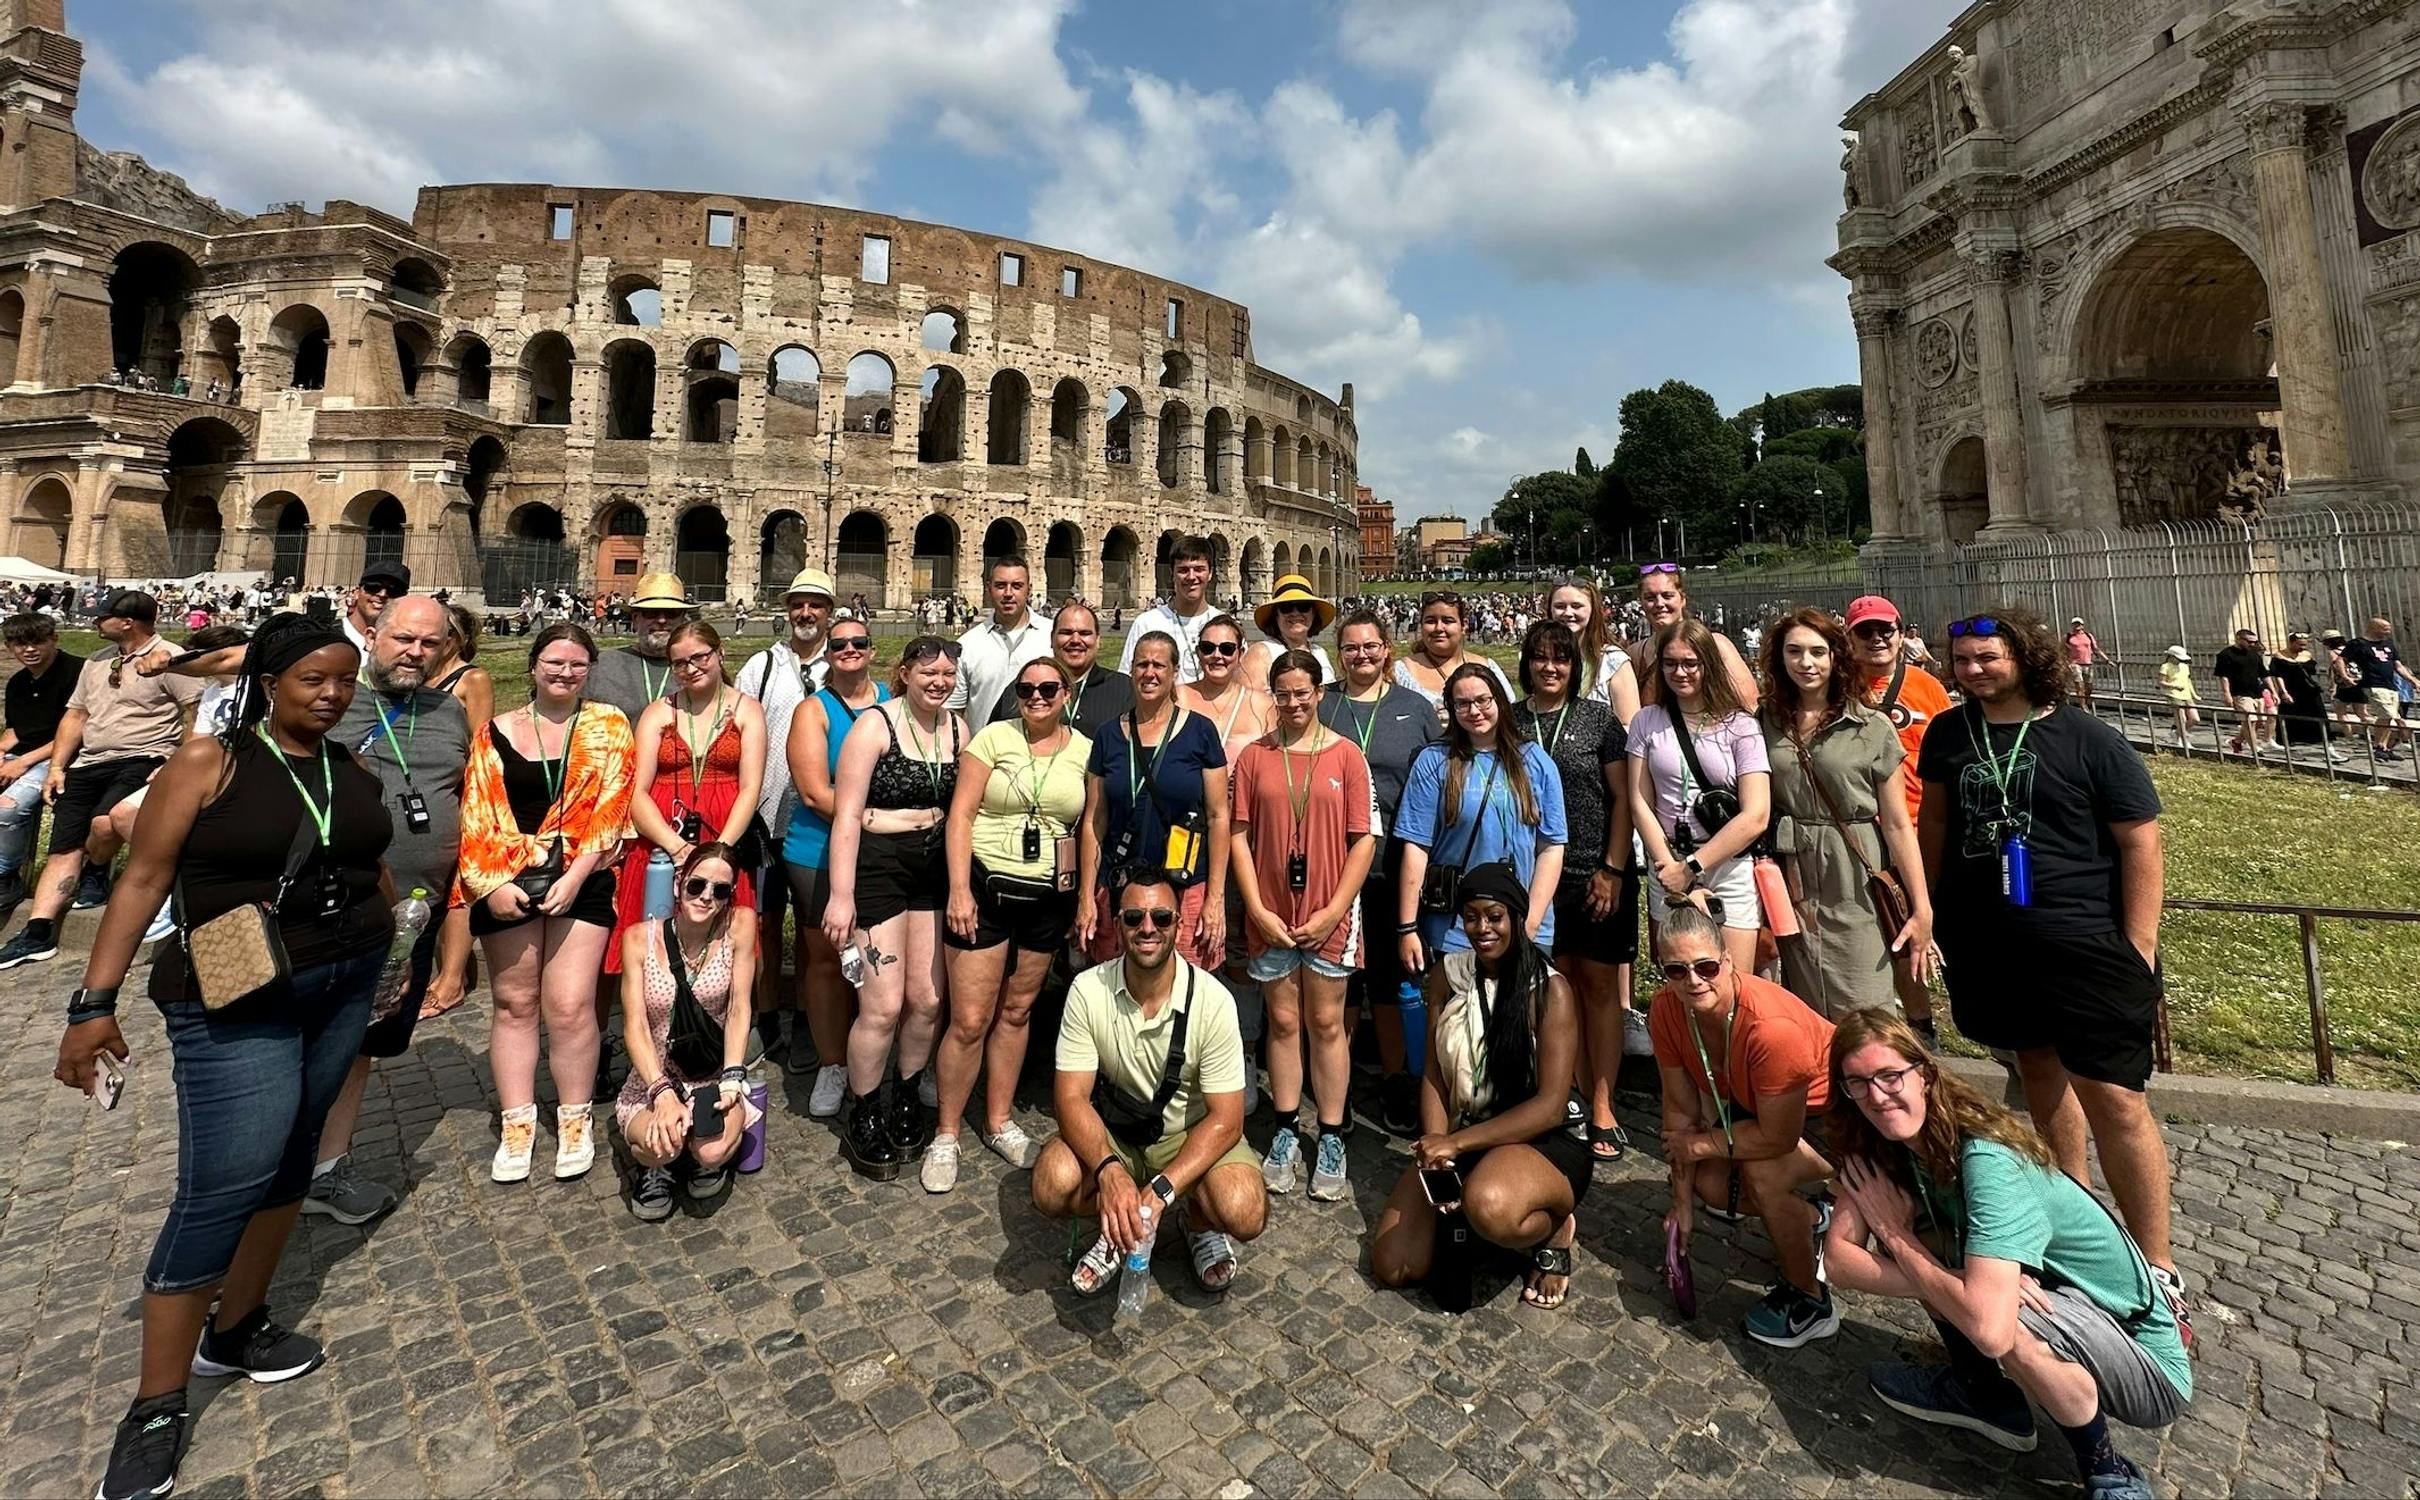 A group photo with the Colosseum in the background.